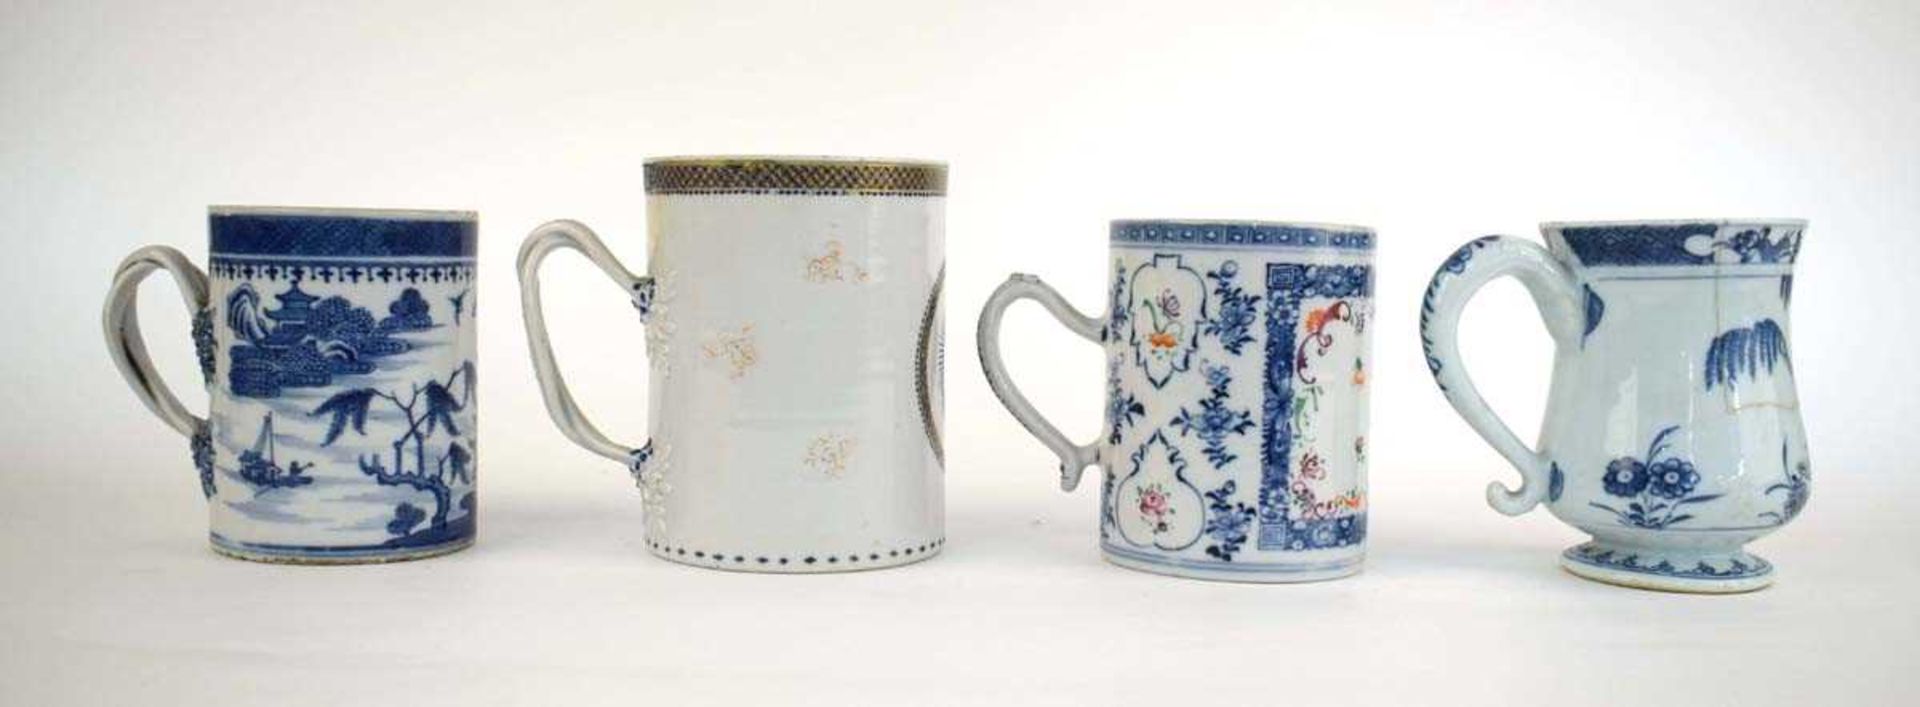 A Chinese Export blue and white tankard with entwined handle and concentric ring decoration, h. 14 - Bild 4 aus 6